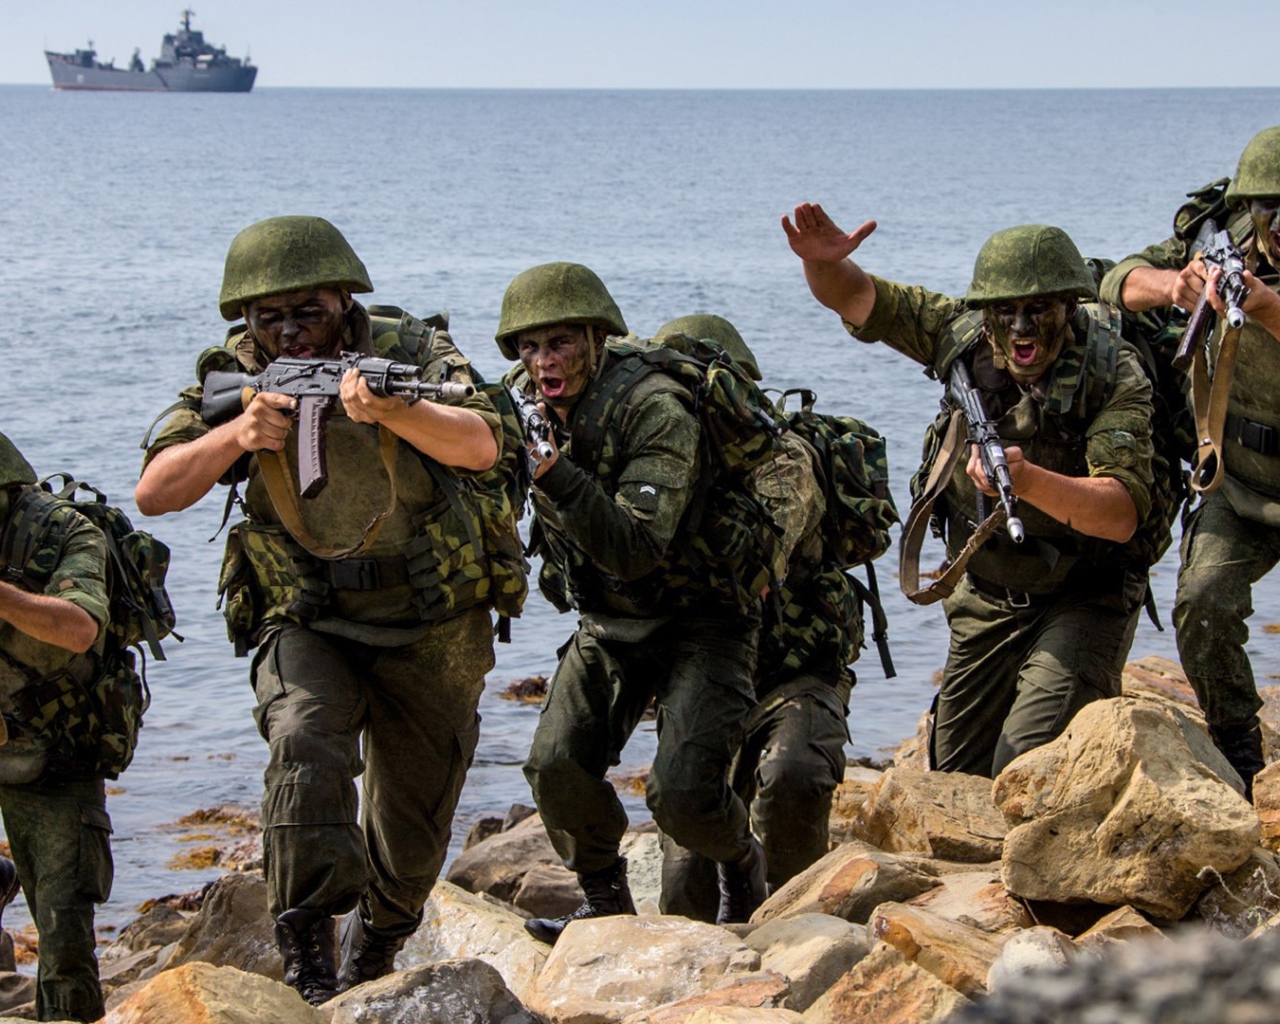 Marines of the Russian Navy